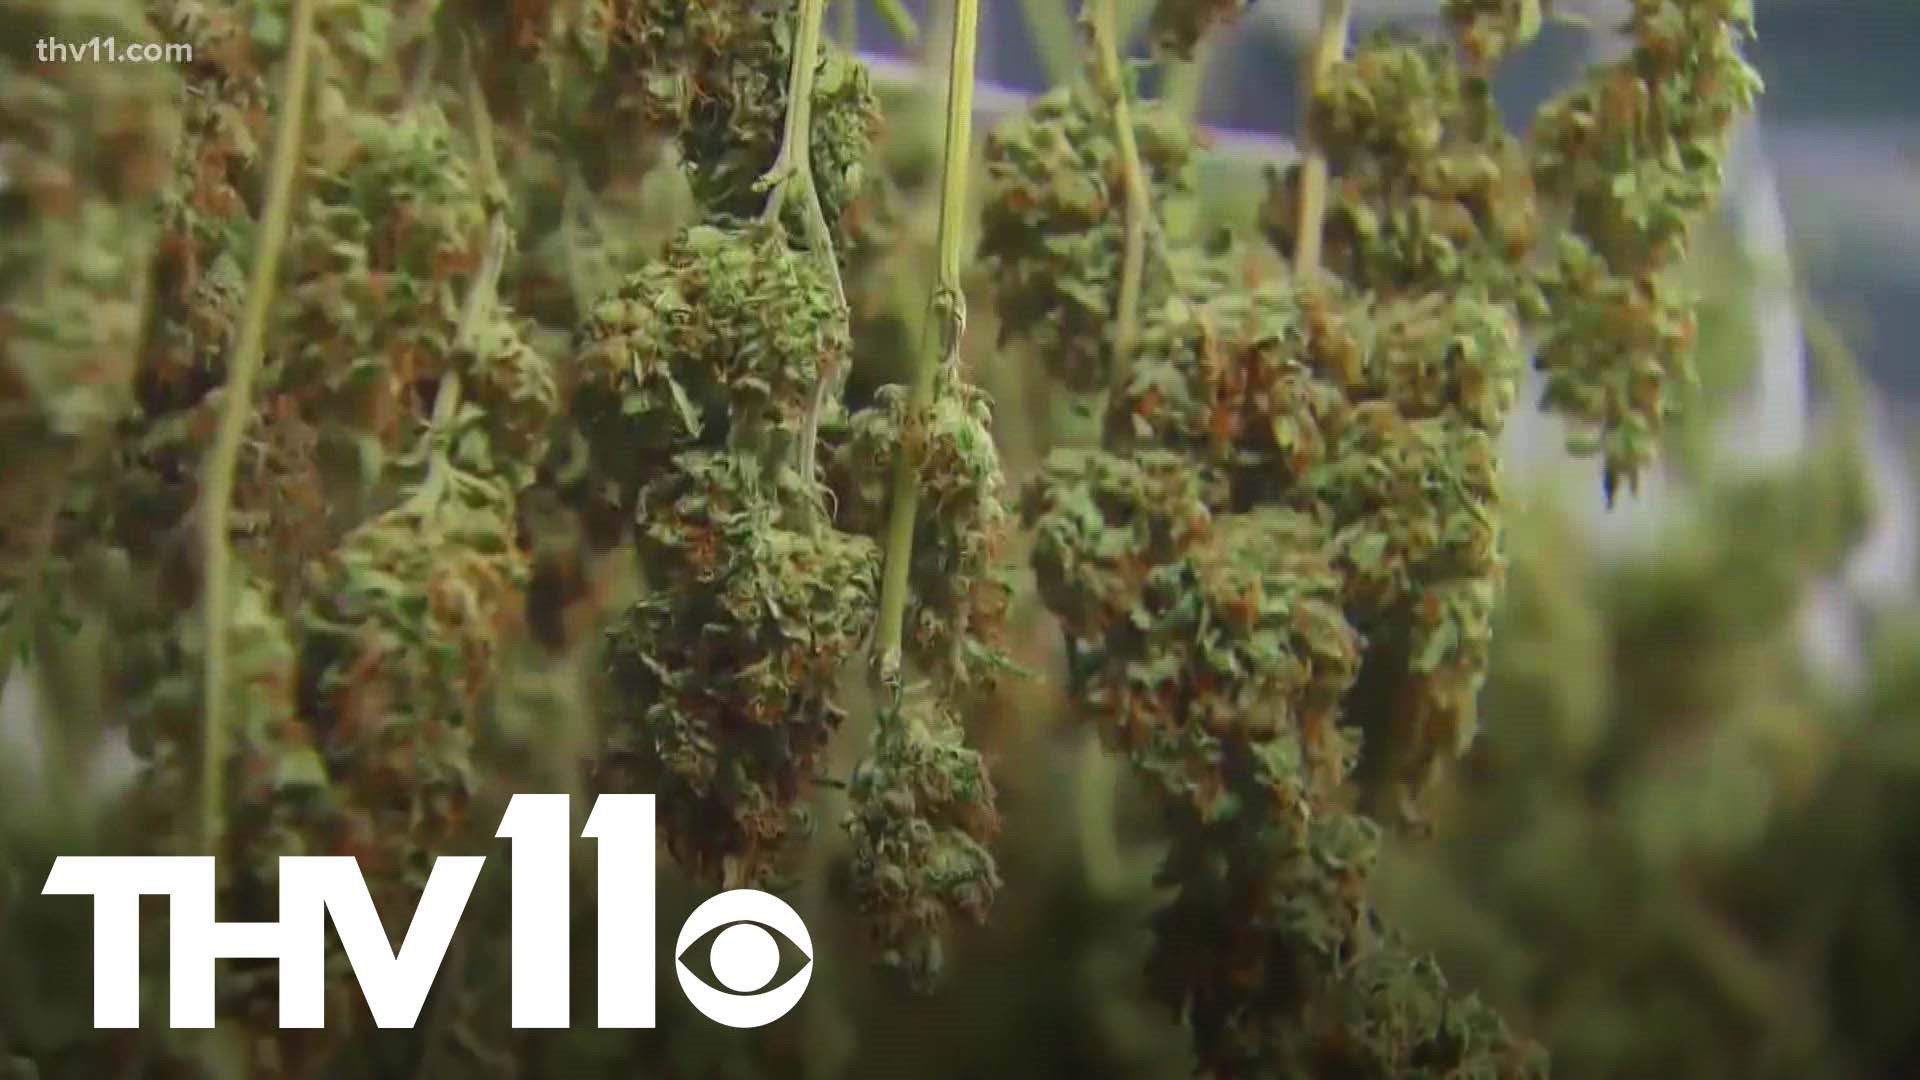 Now that recreational marijuana is officially on the November ballot, many Arkansans are speaking out, with some split on the measure.